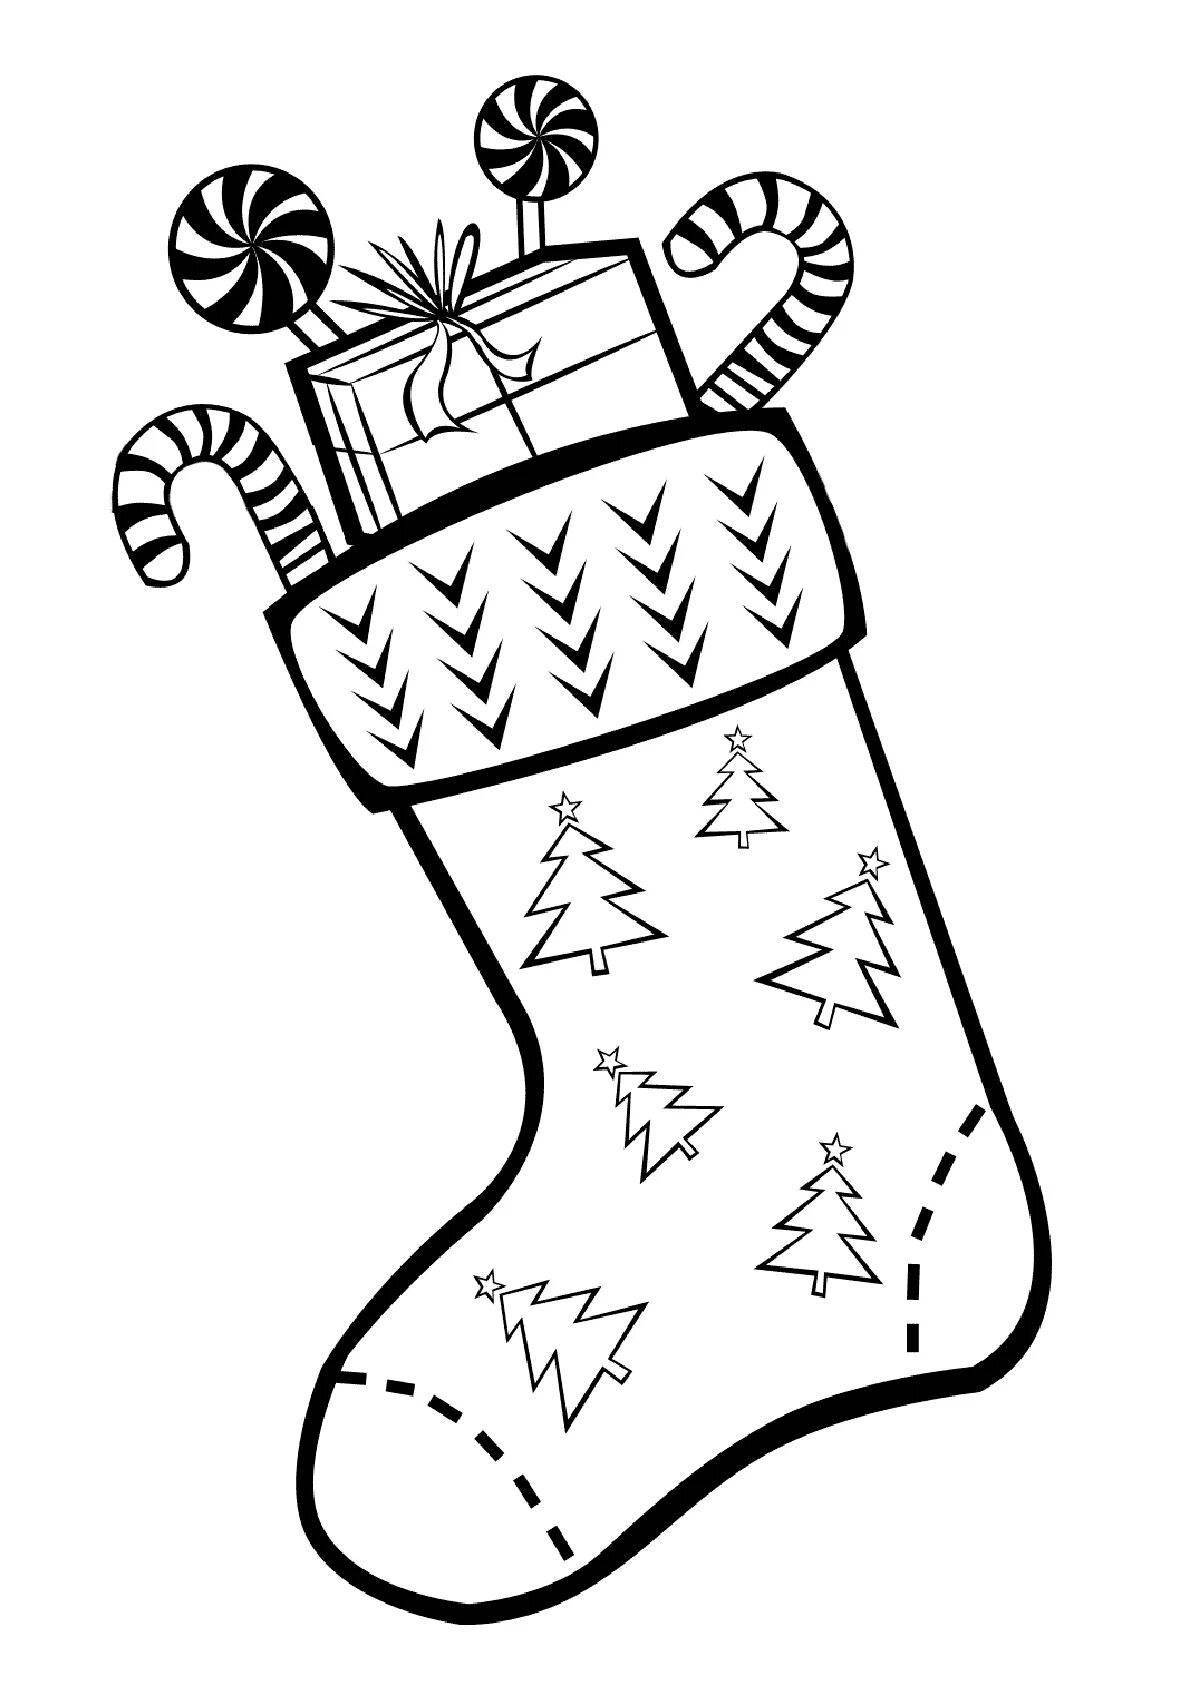 Outstanding christmas socks coloring page